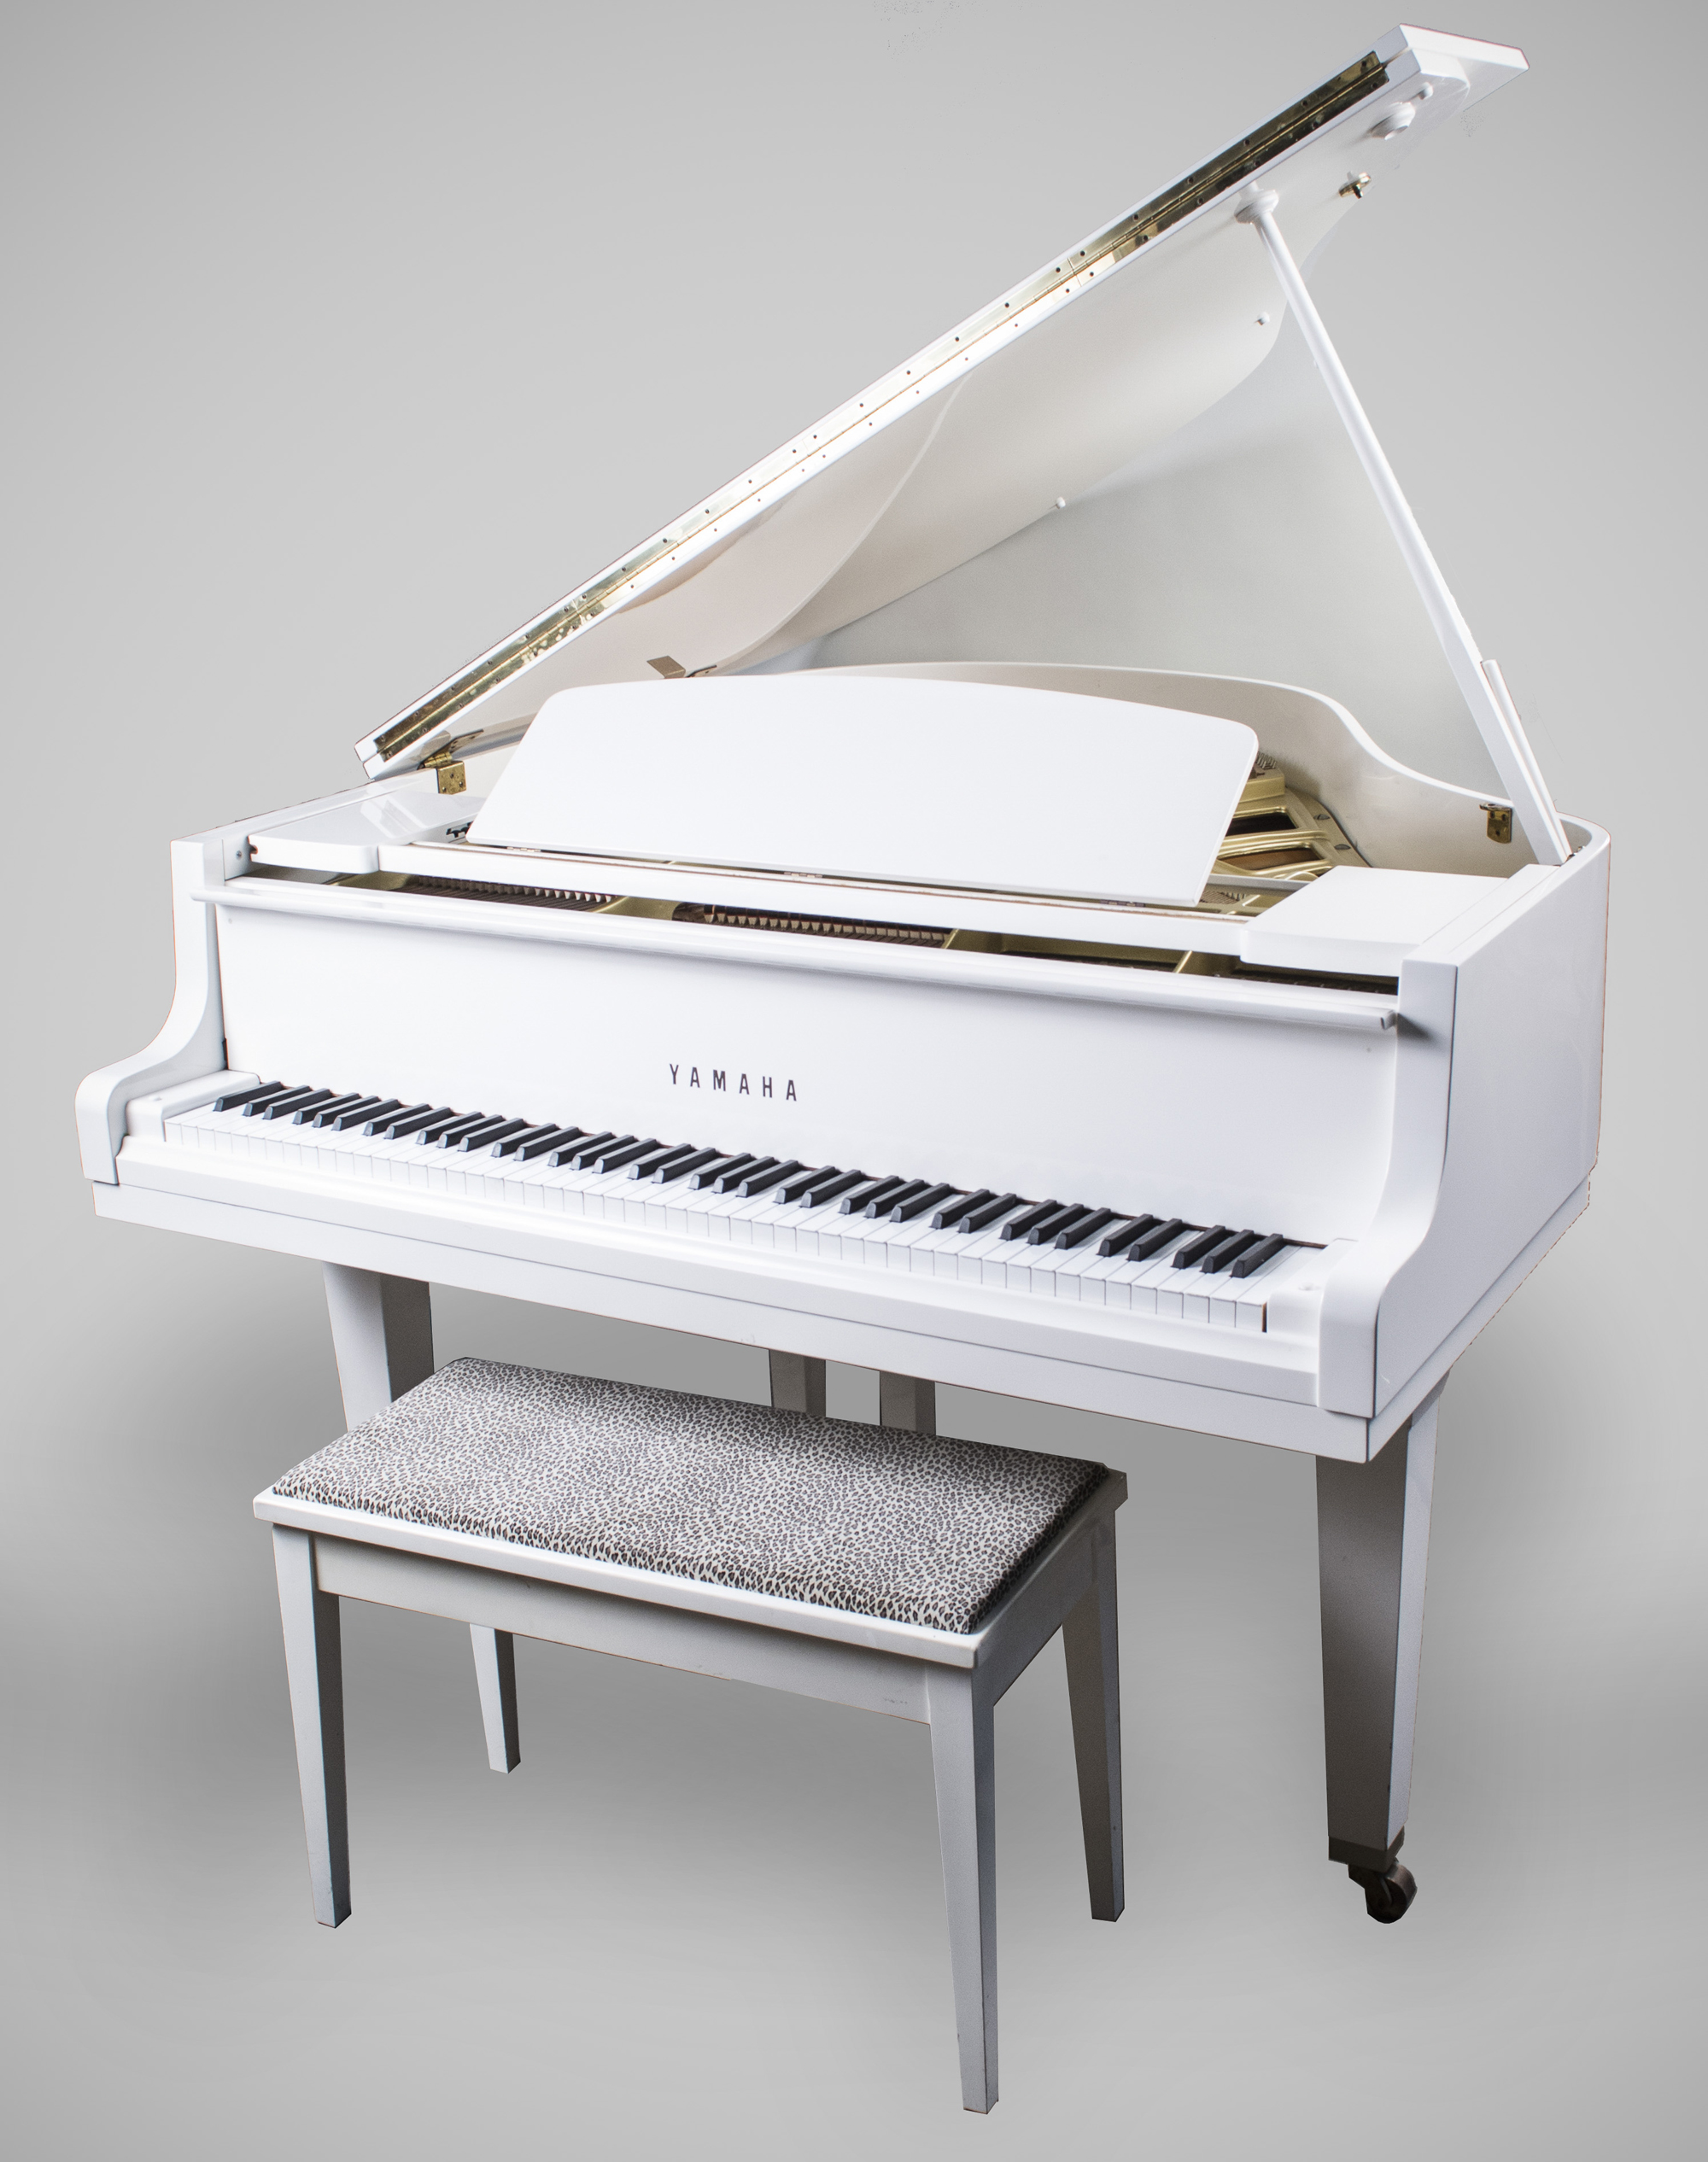 Yamaha baby grand paino, white lacquer finish. Sold for $5,700.